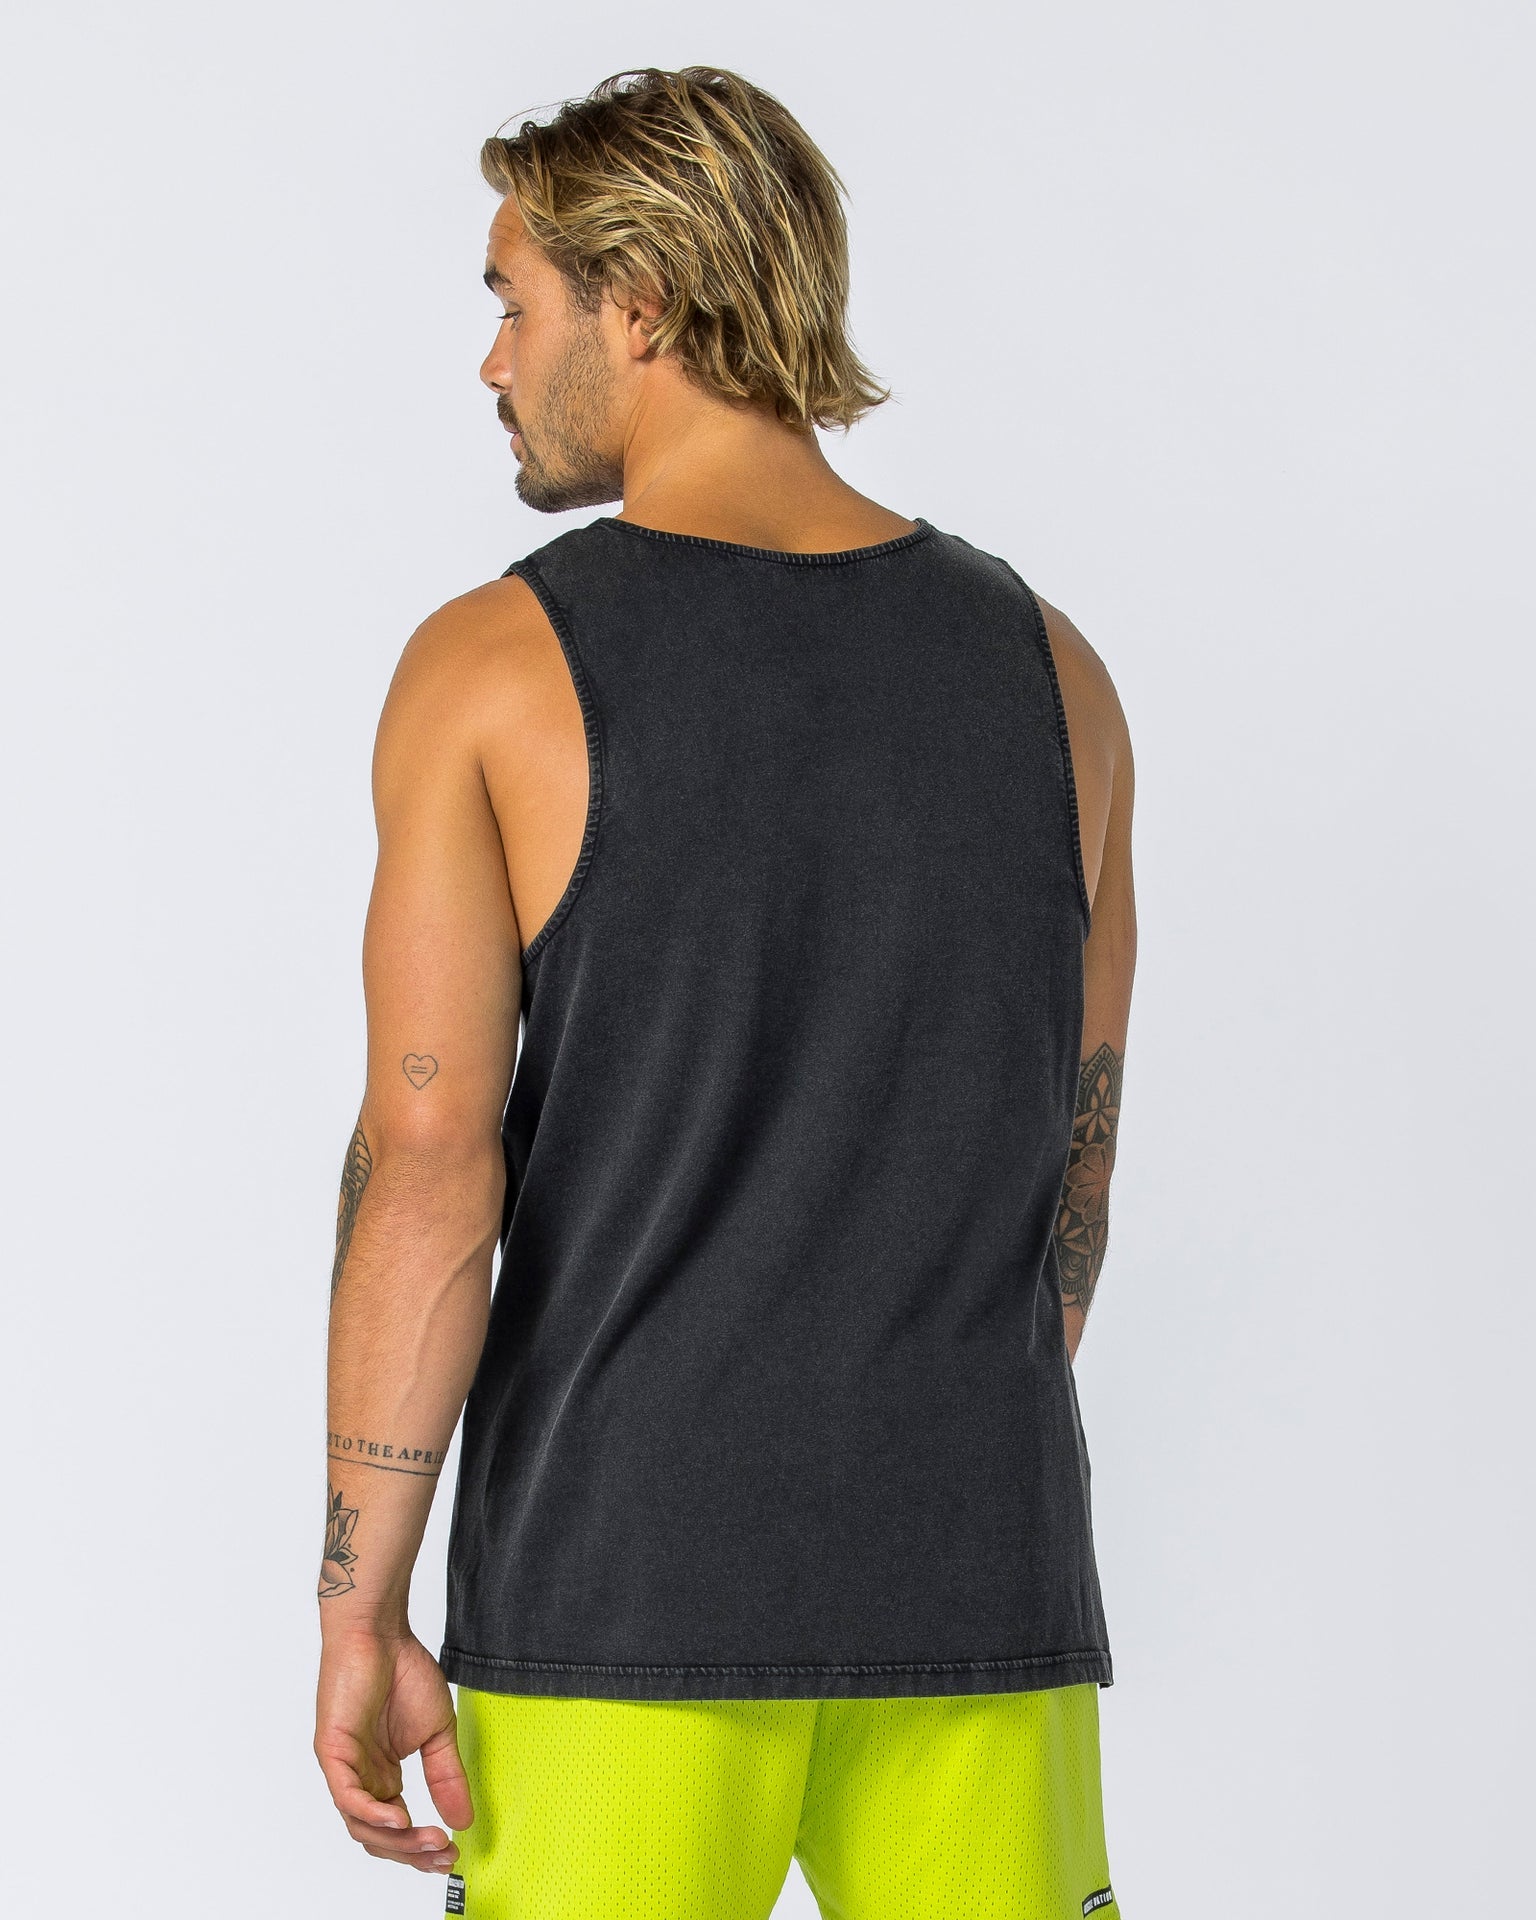 Muscle Nation Tank Tops Copy of Box Wave Vintage Tank - Washed Black / Charcoal